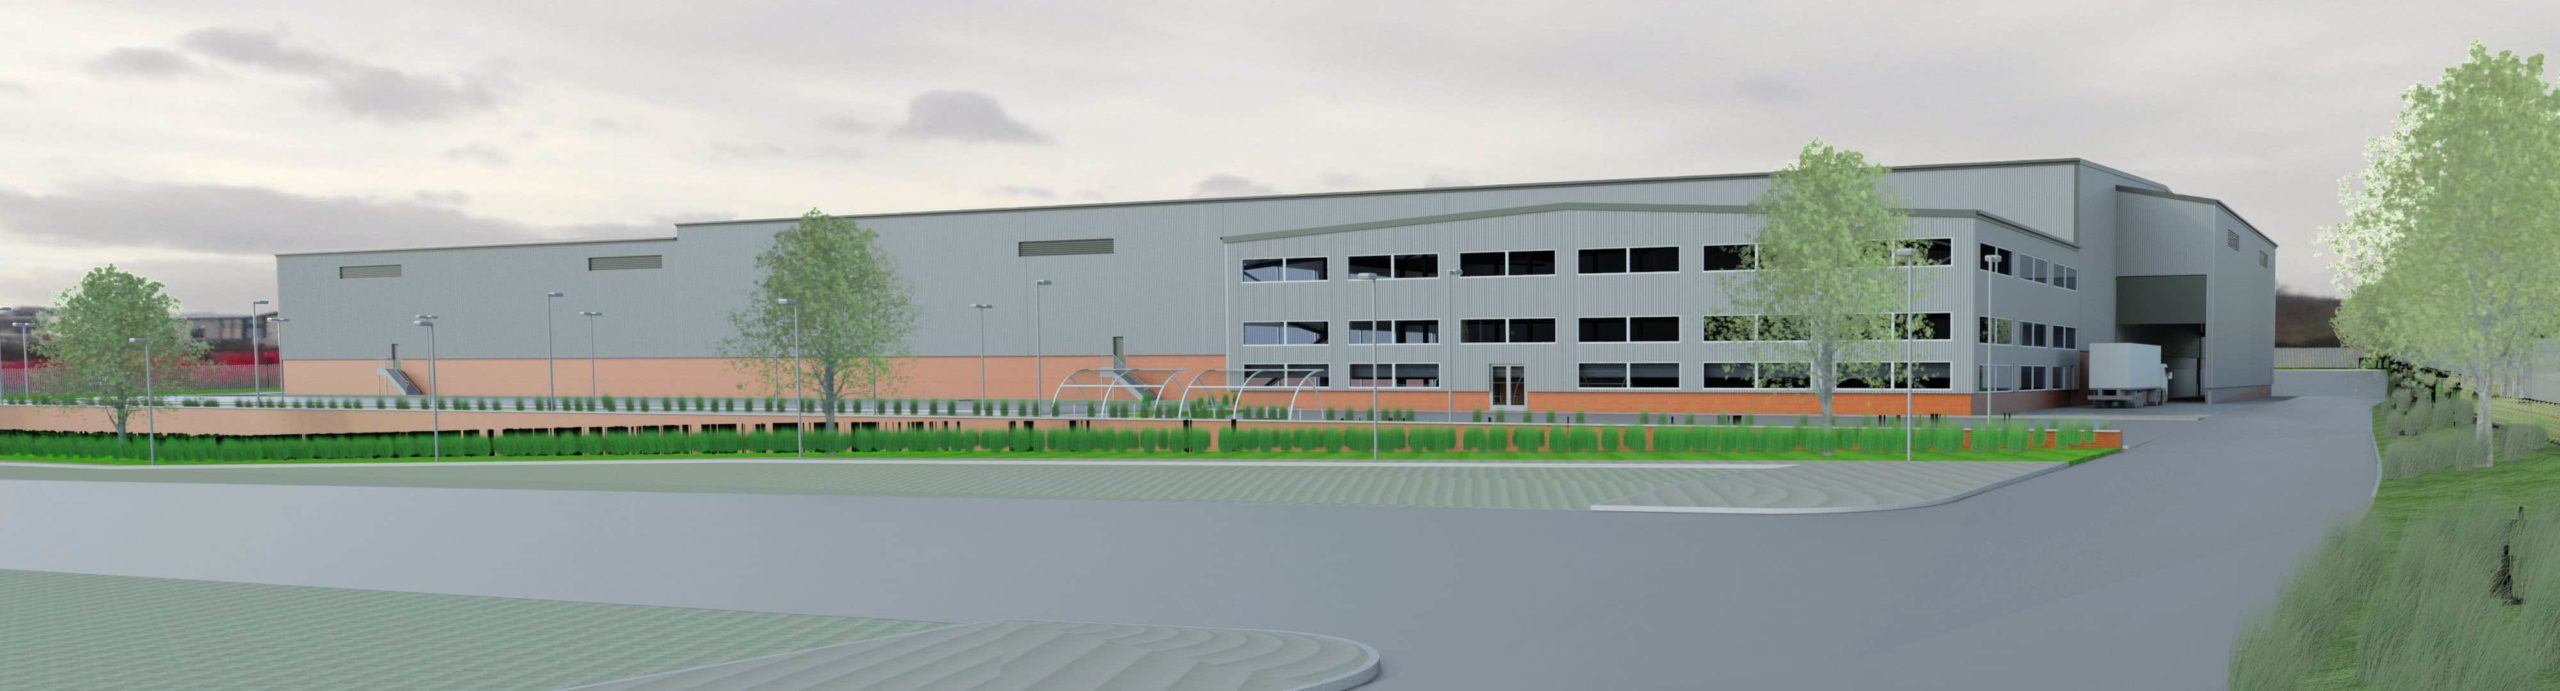 An artist's impression of the SUEZ Aberdeen facility